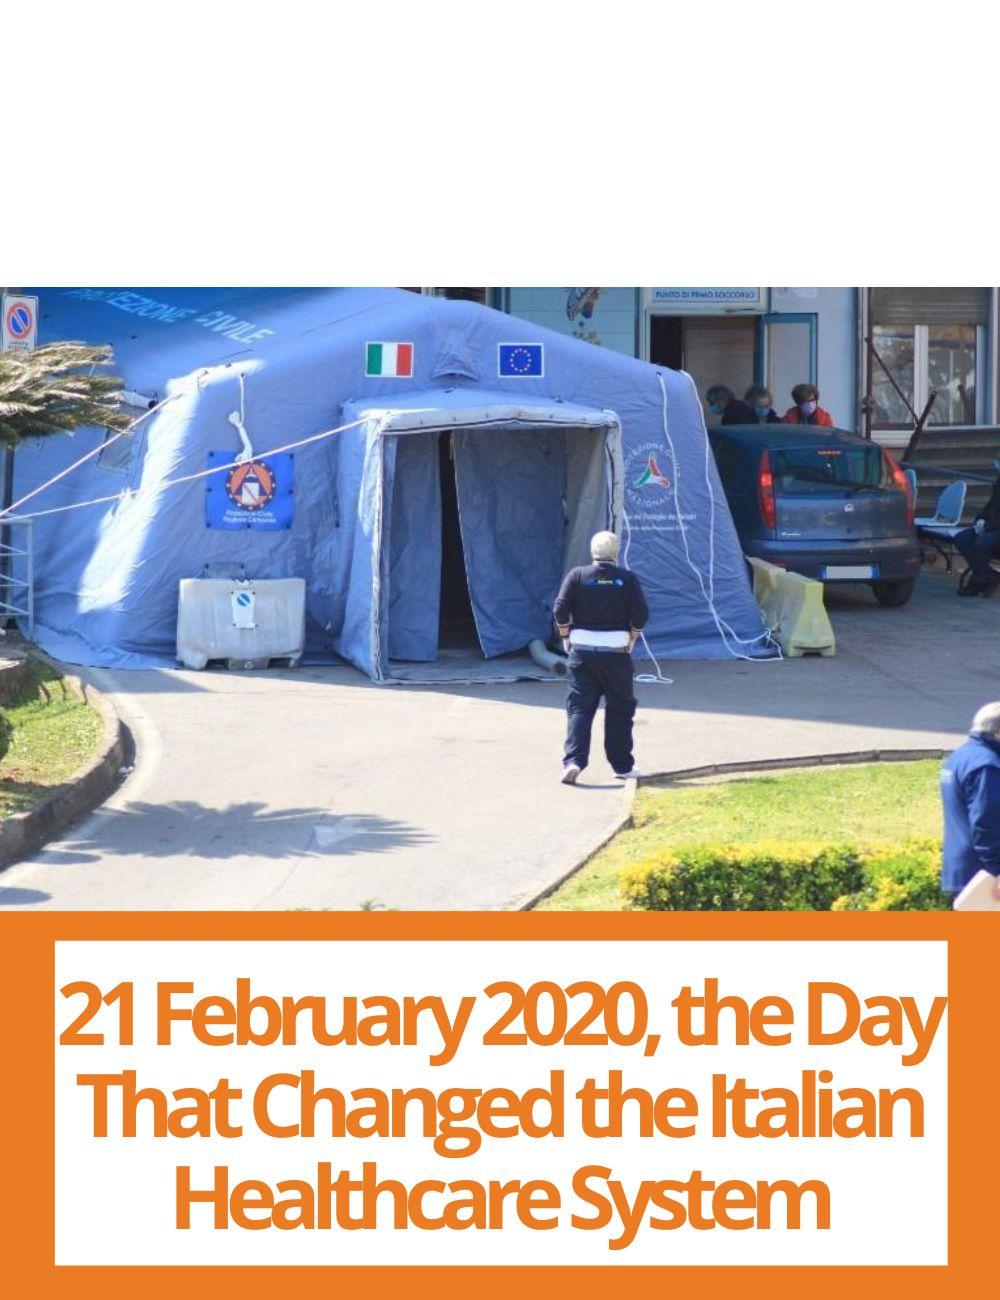 Link to related stories. Image: a medical tent. Story headline: OASI Report: 21 February, 2020, the Day That Changed the Italian Healthcare System